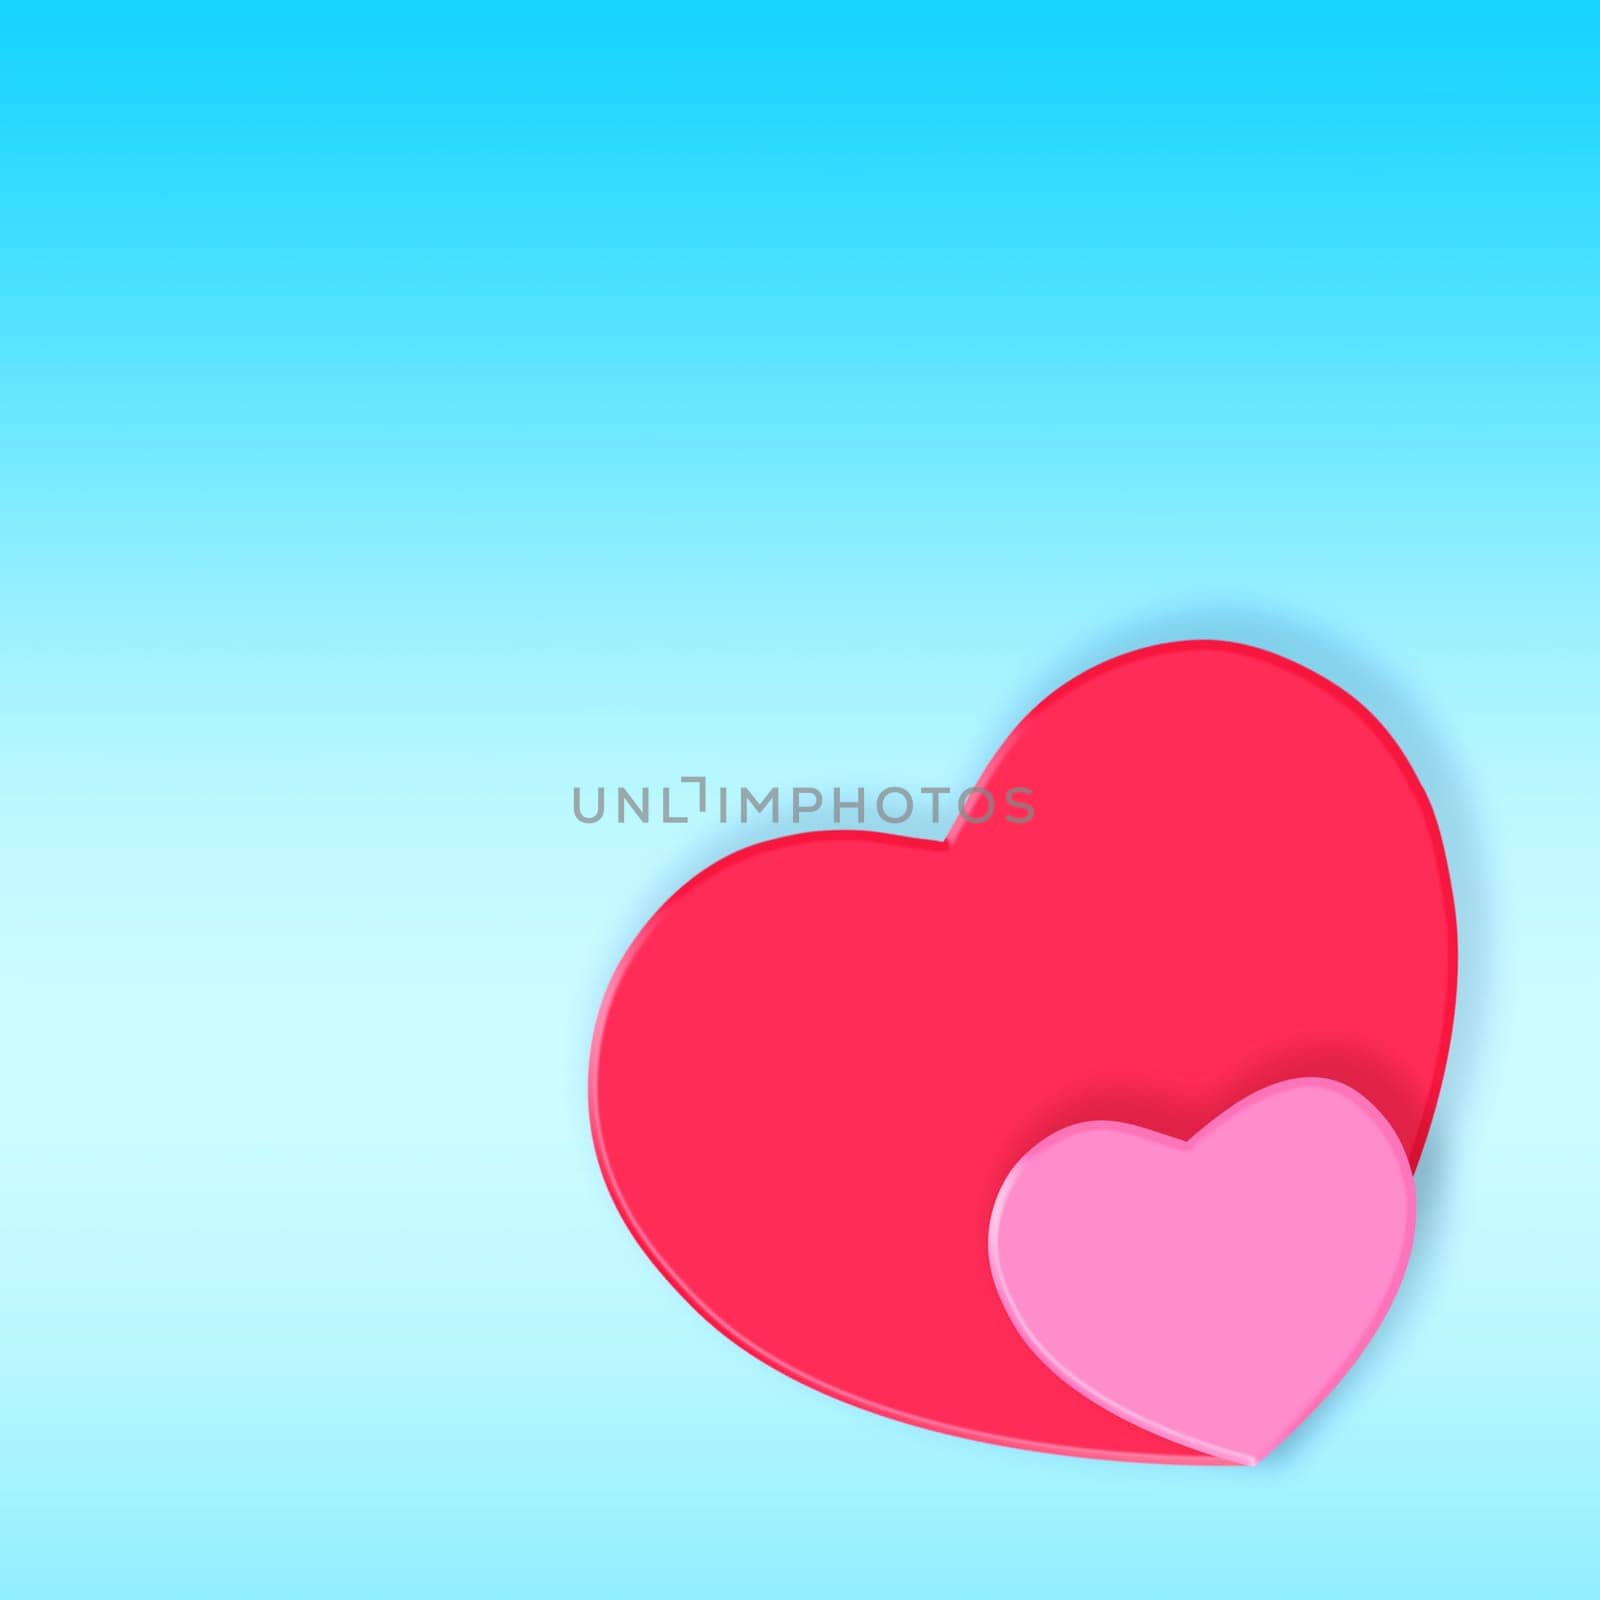 Illustration, heart and creative symbol for care or devotion, sign and blue background. Shape, romance and sketch for valentines day celebration, icon and abstract art for support or peace emotion.